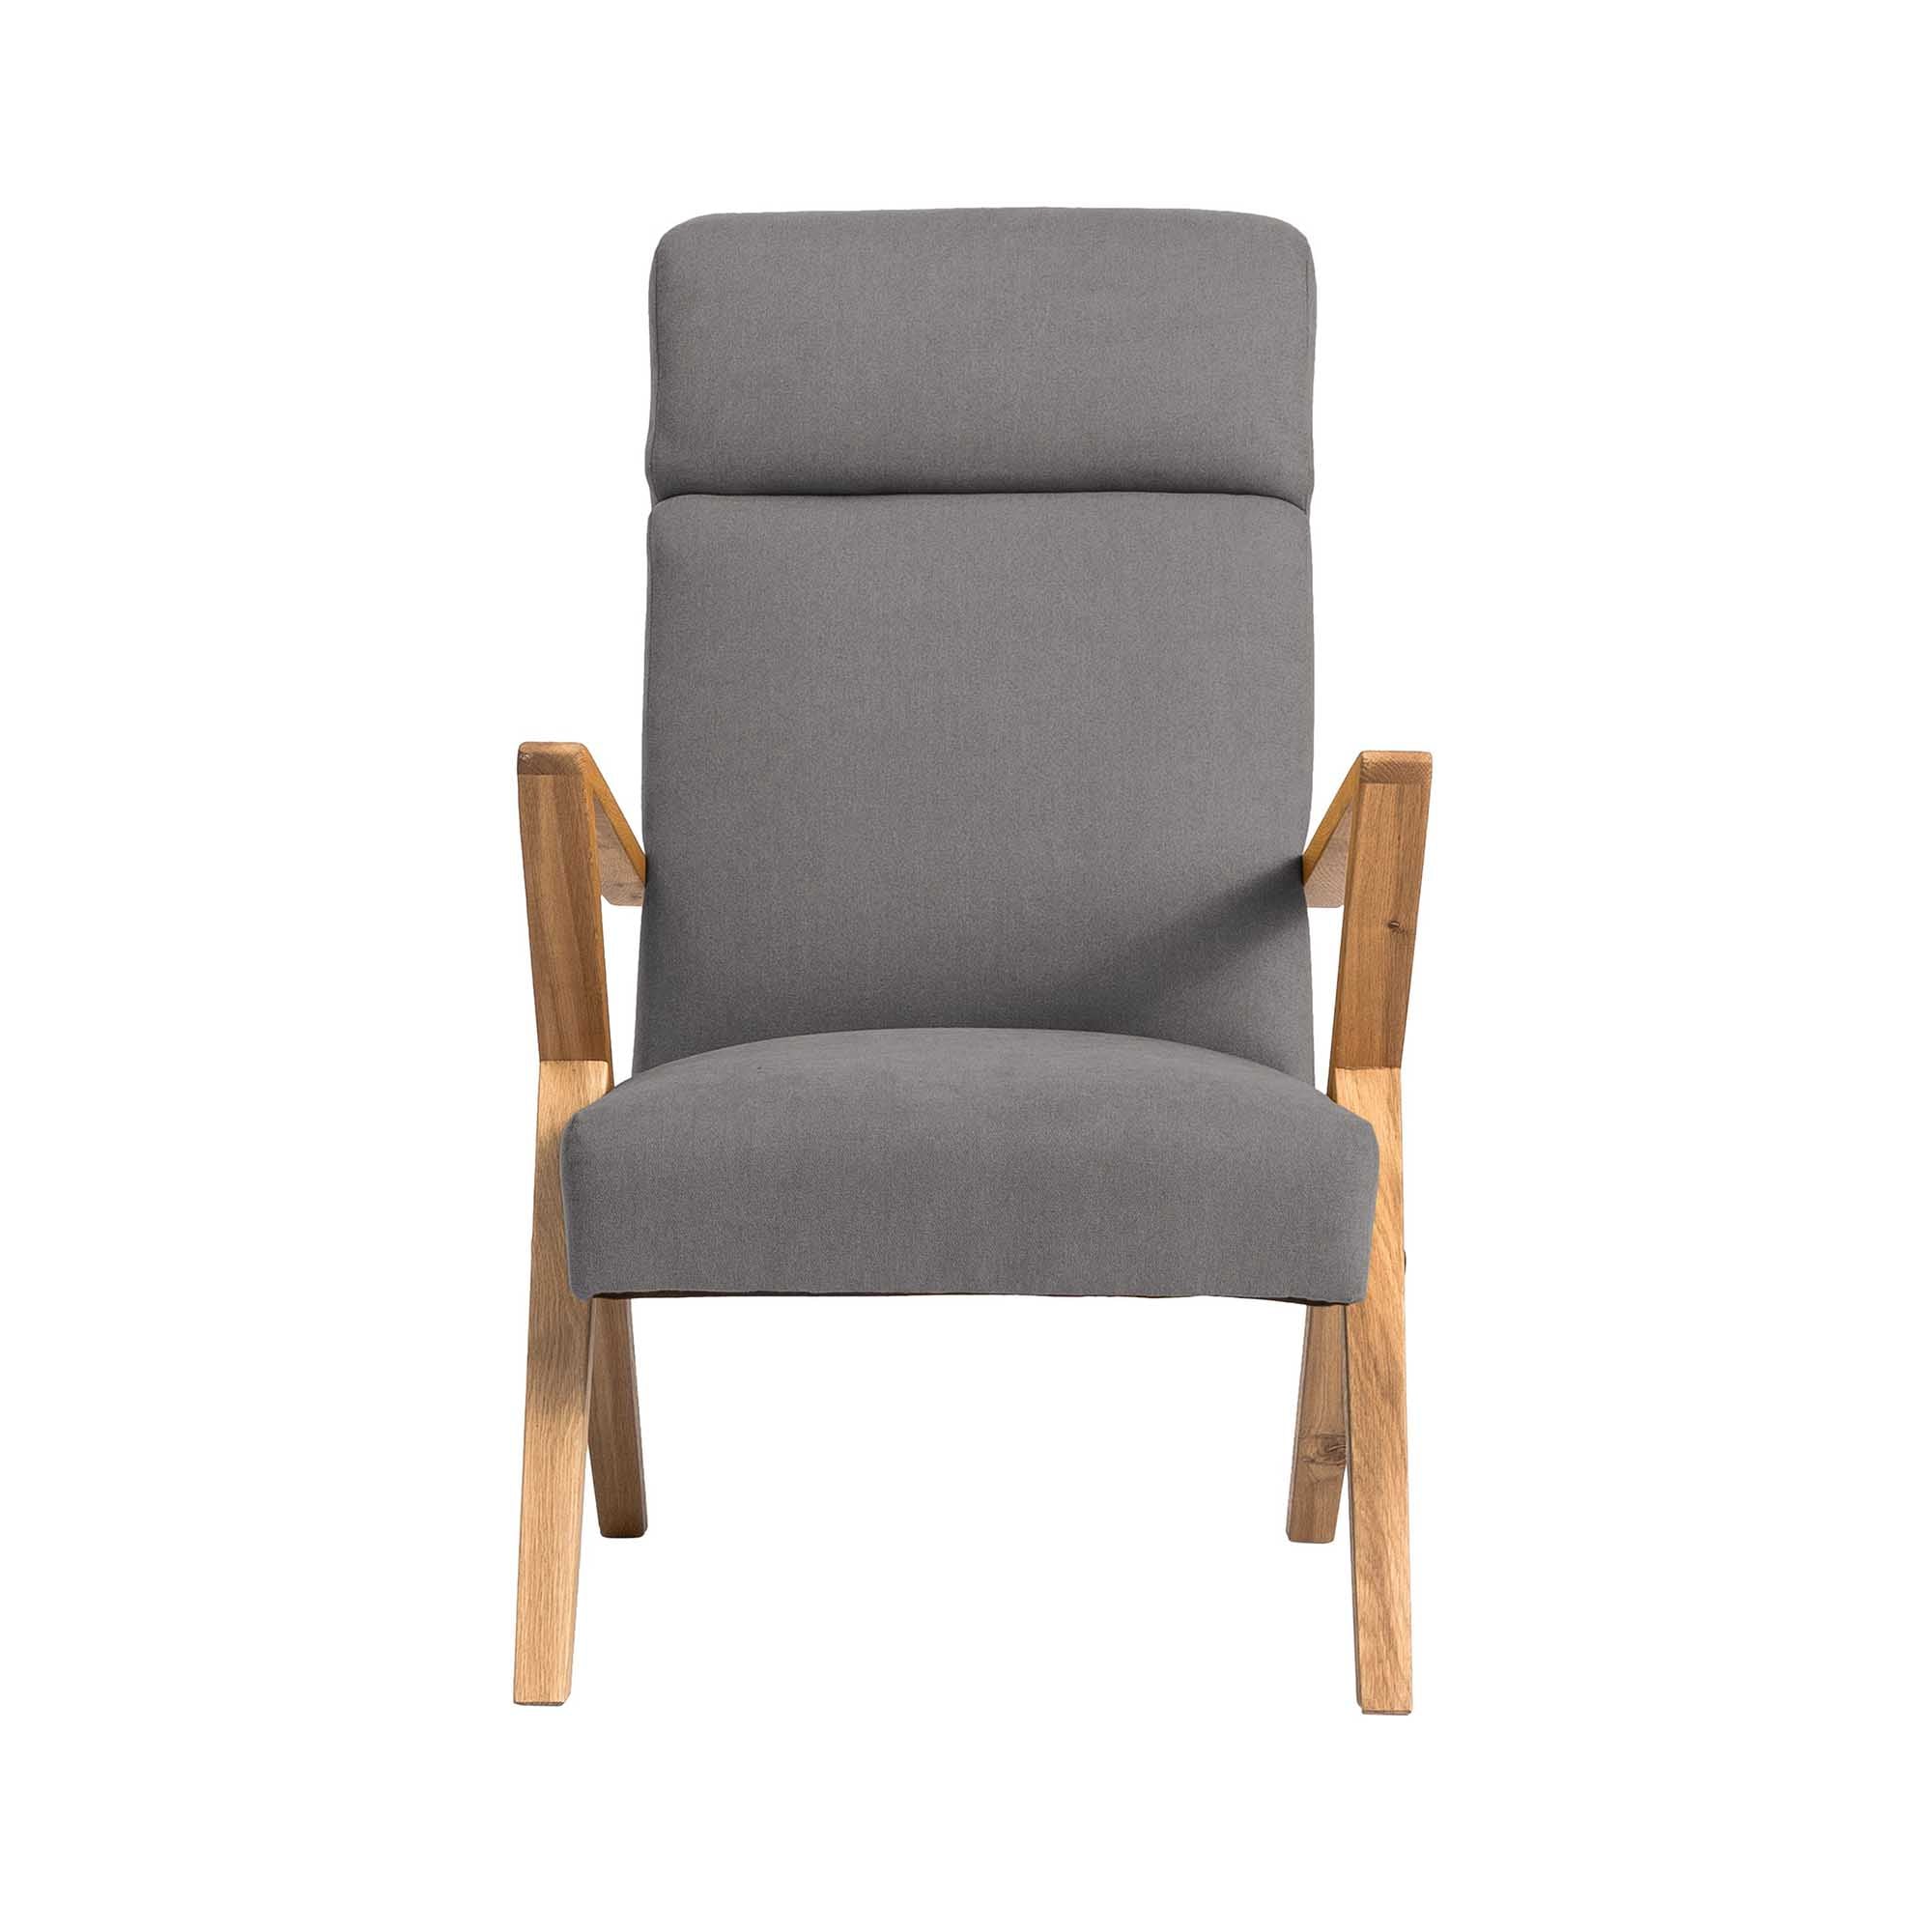 Lounge Chair, Oak Wood Frame, Natural Colour grey fabric, front view